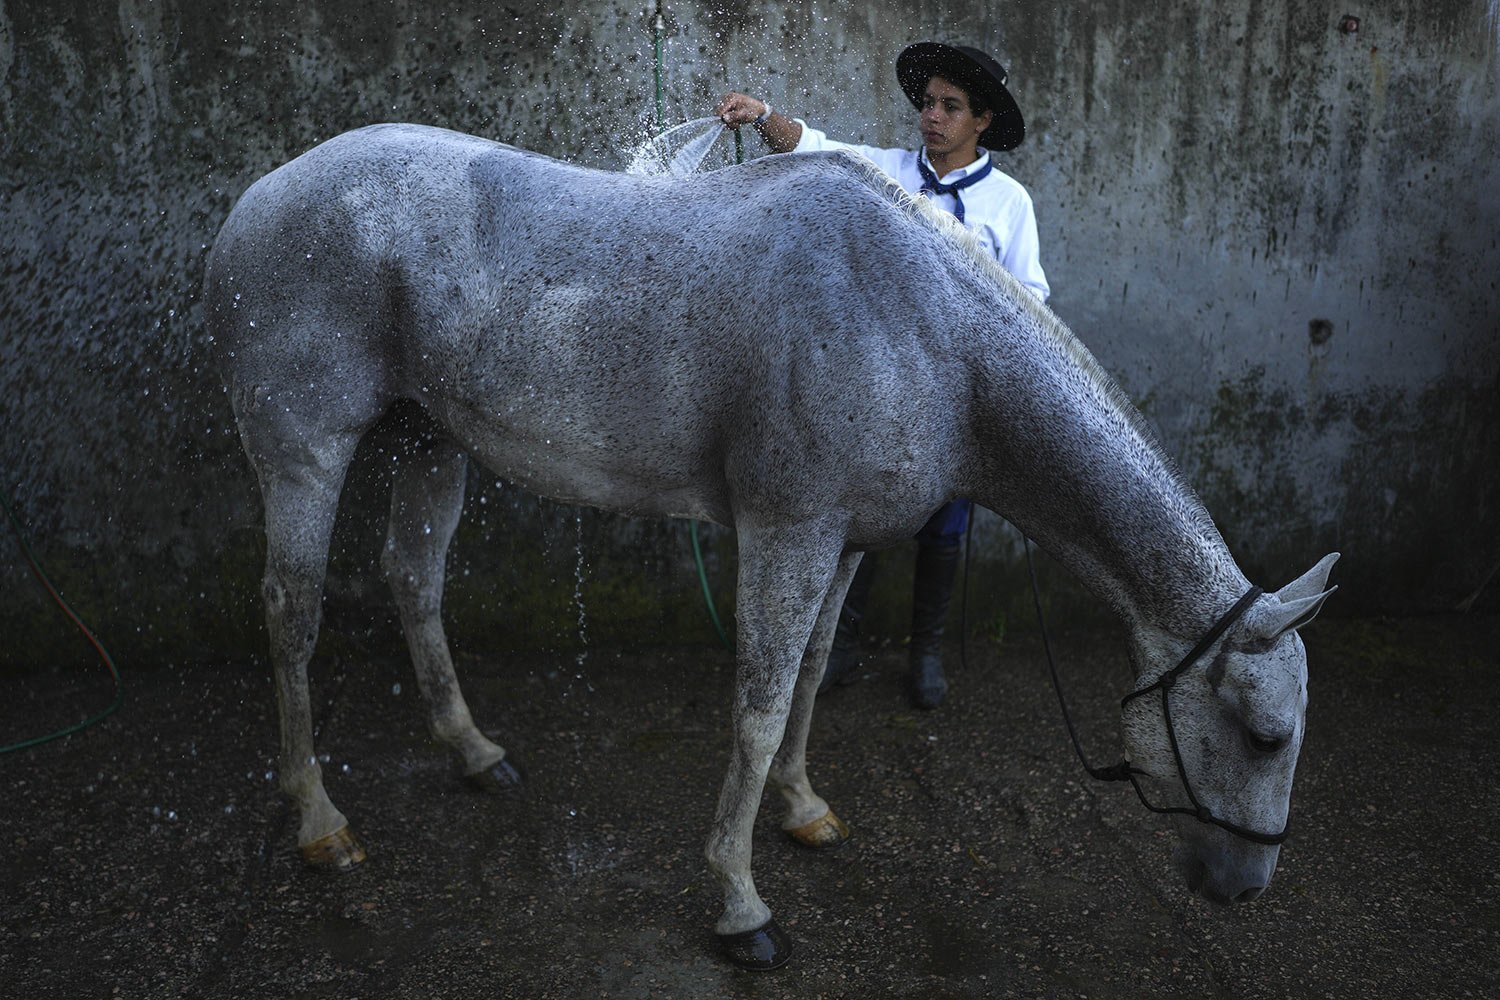  A gaucho or South American cowboy bathes a horse during the Criolla Week rodeo festival, in Montevideo, Uruguay, March 26, 2024. The rodeo has been a Holy Week tradition since 1925. (AP Photo/Matilde Campodonico) 